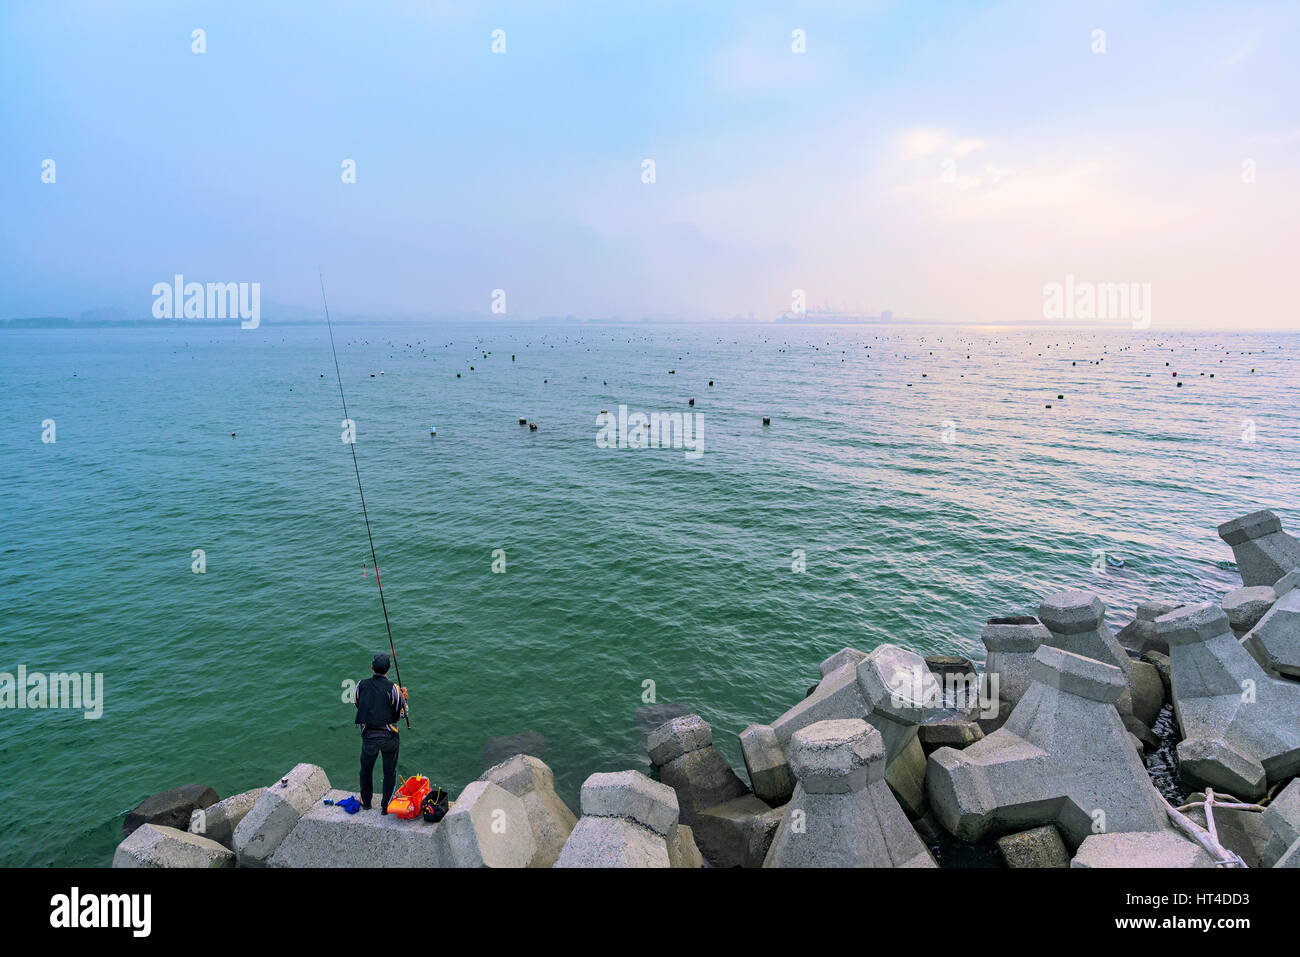 TAIPEI, TAIWAN - JANUARY 05: Fisherman  alone trying to catch fish along the rocky seafront in the Tamsui area of Taipei on January 05, 2017 in Taipei Stock Photo